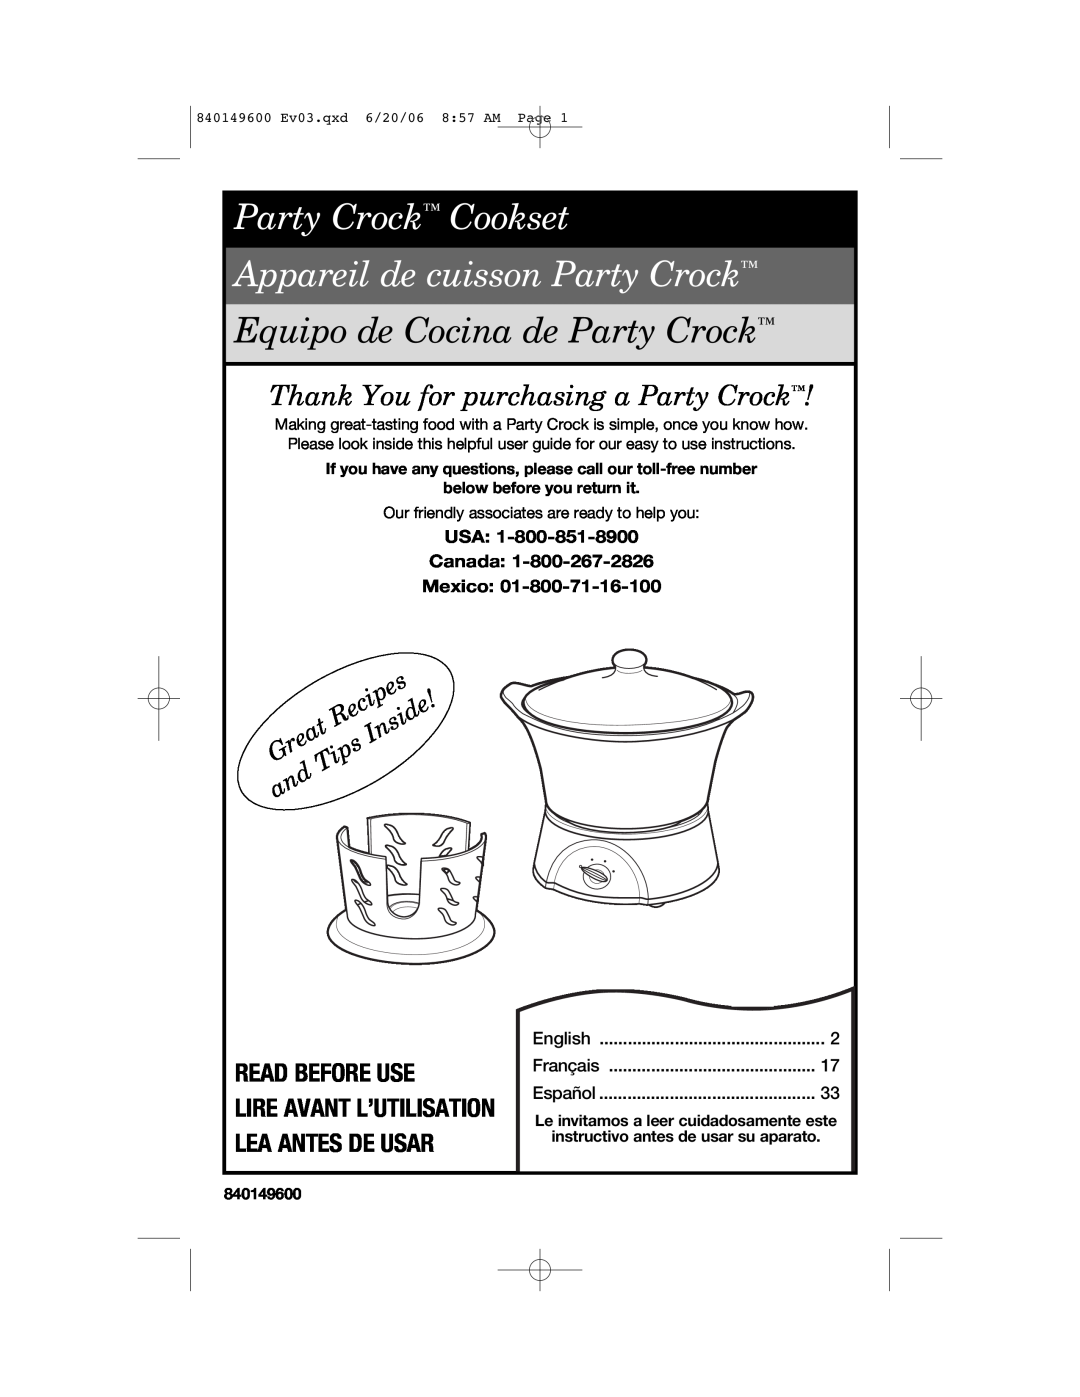 Hamilton Beach 840149600 manual Thank You for purchasing a Party Crock, Read Before Use, USA Canada Mexico, Recipes, Great 